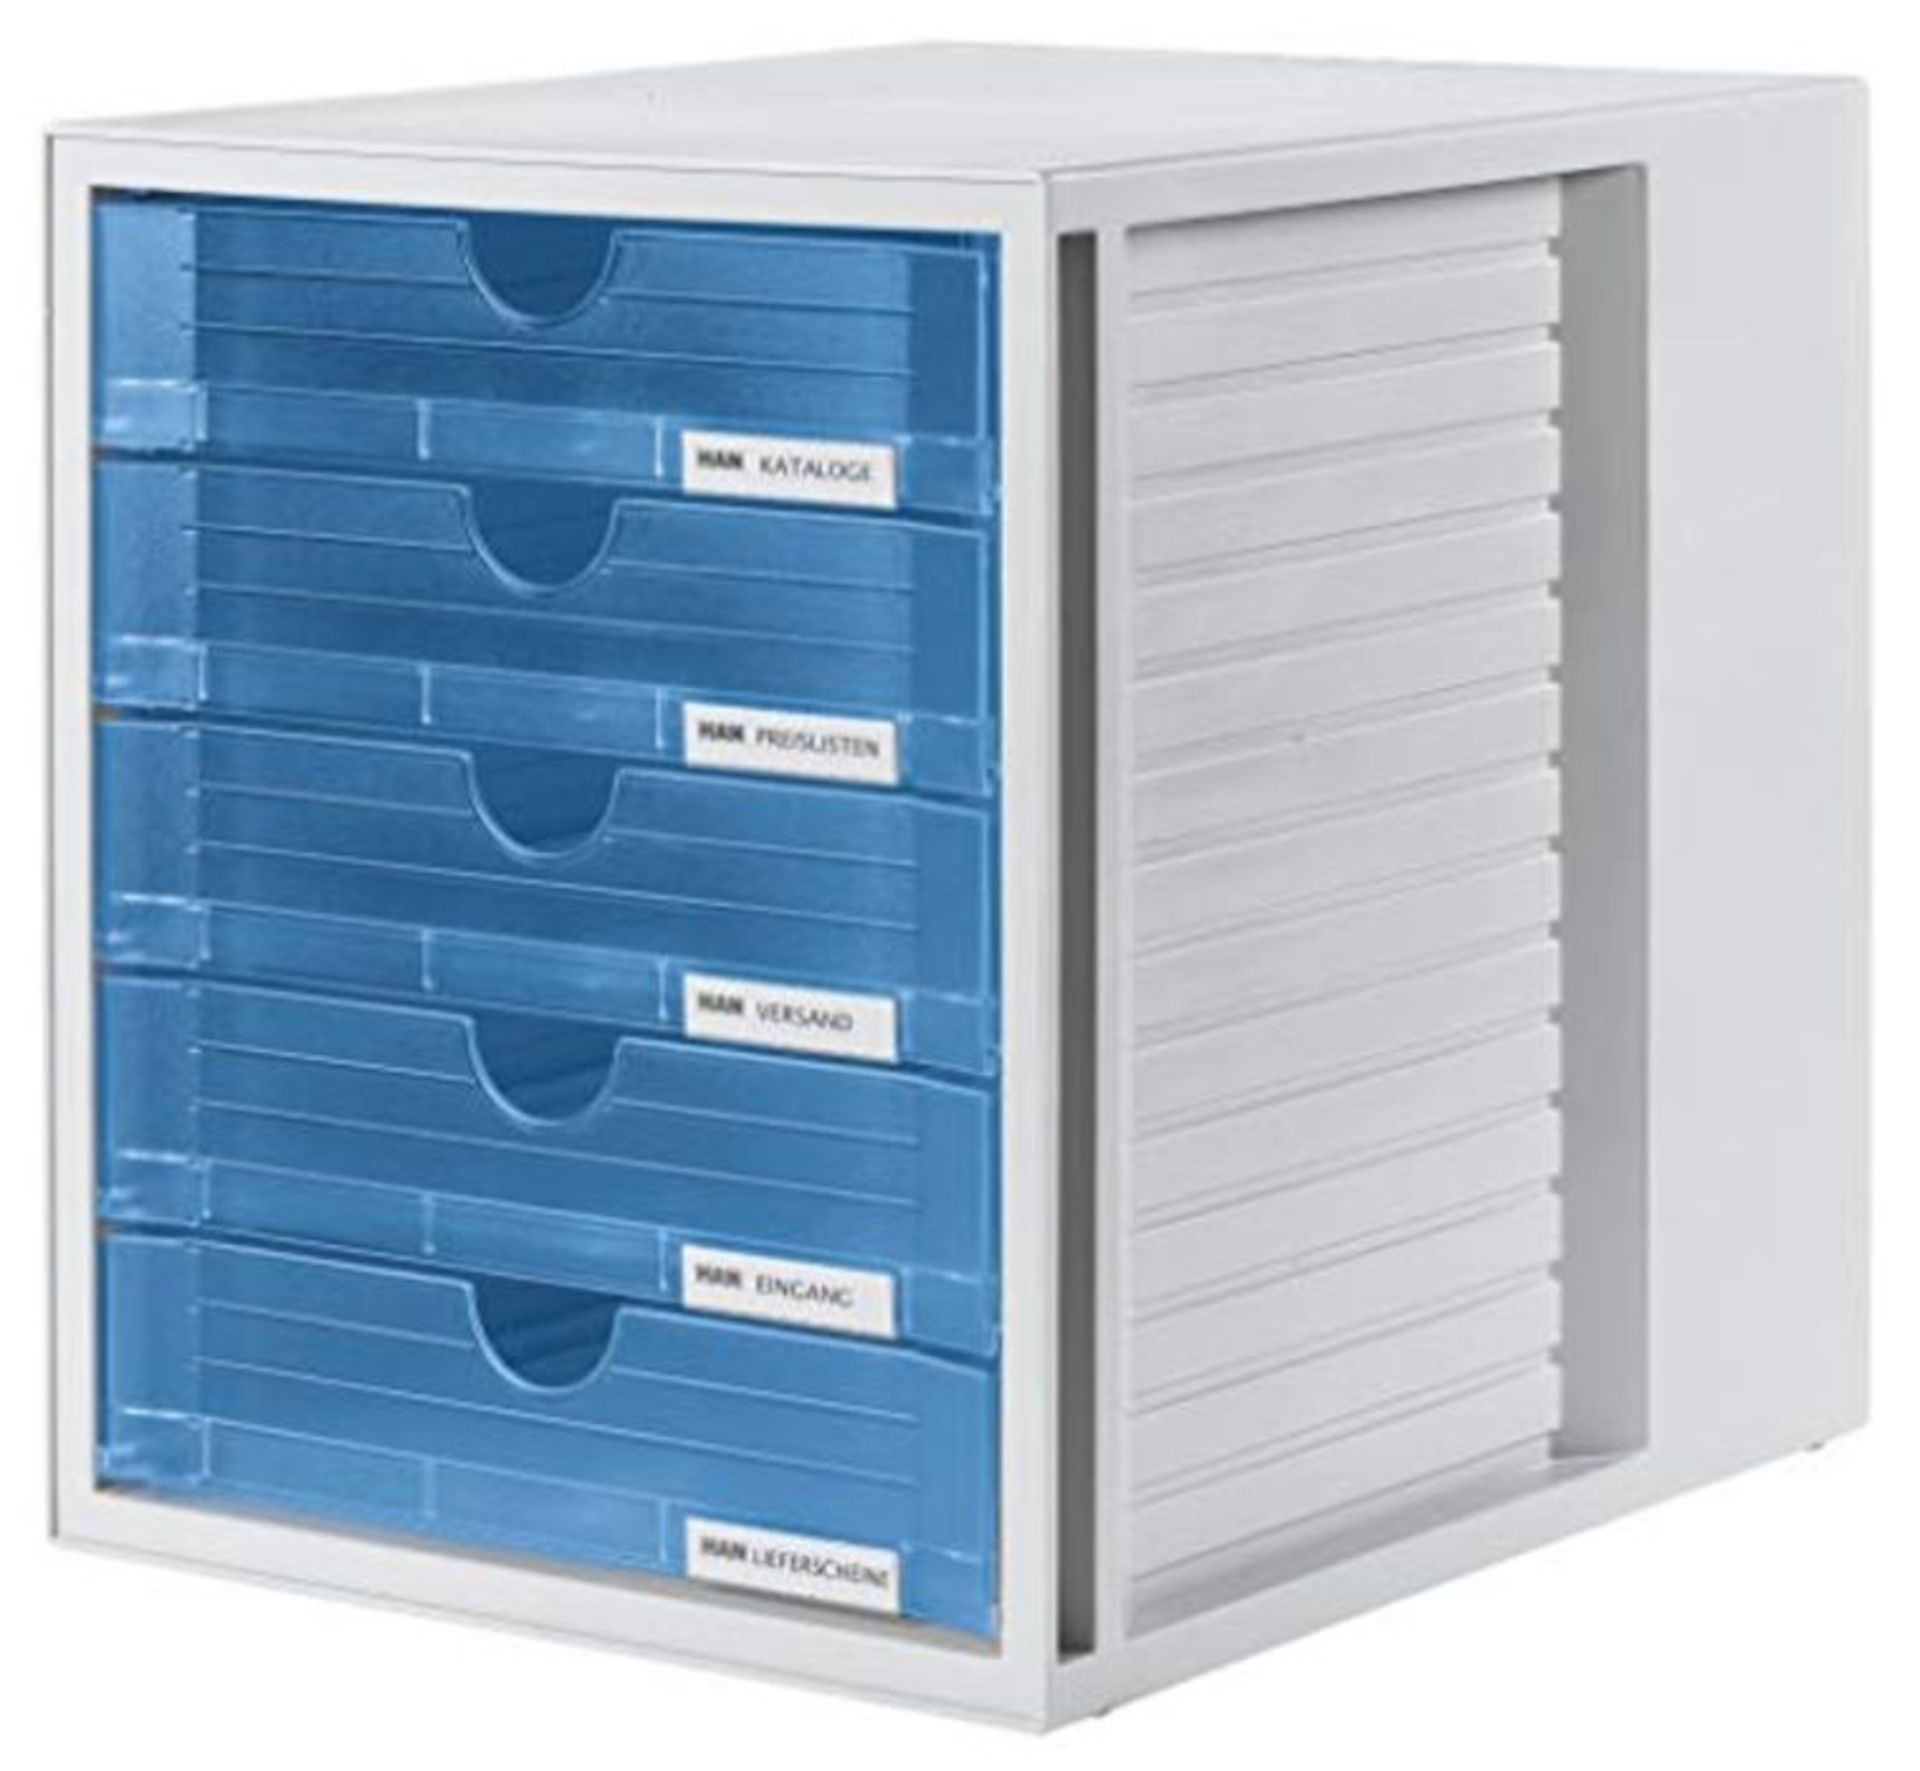 HAN 1450-64, Drawer set System box, New colour! Innovative, attractive design with 5 c